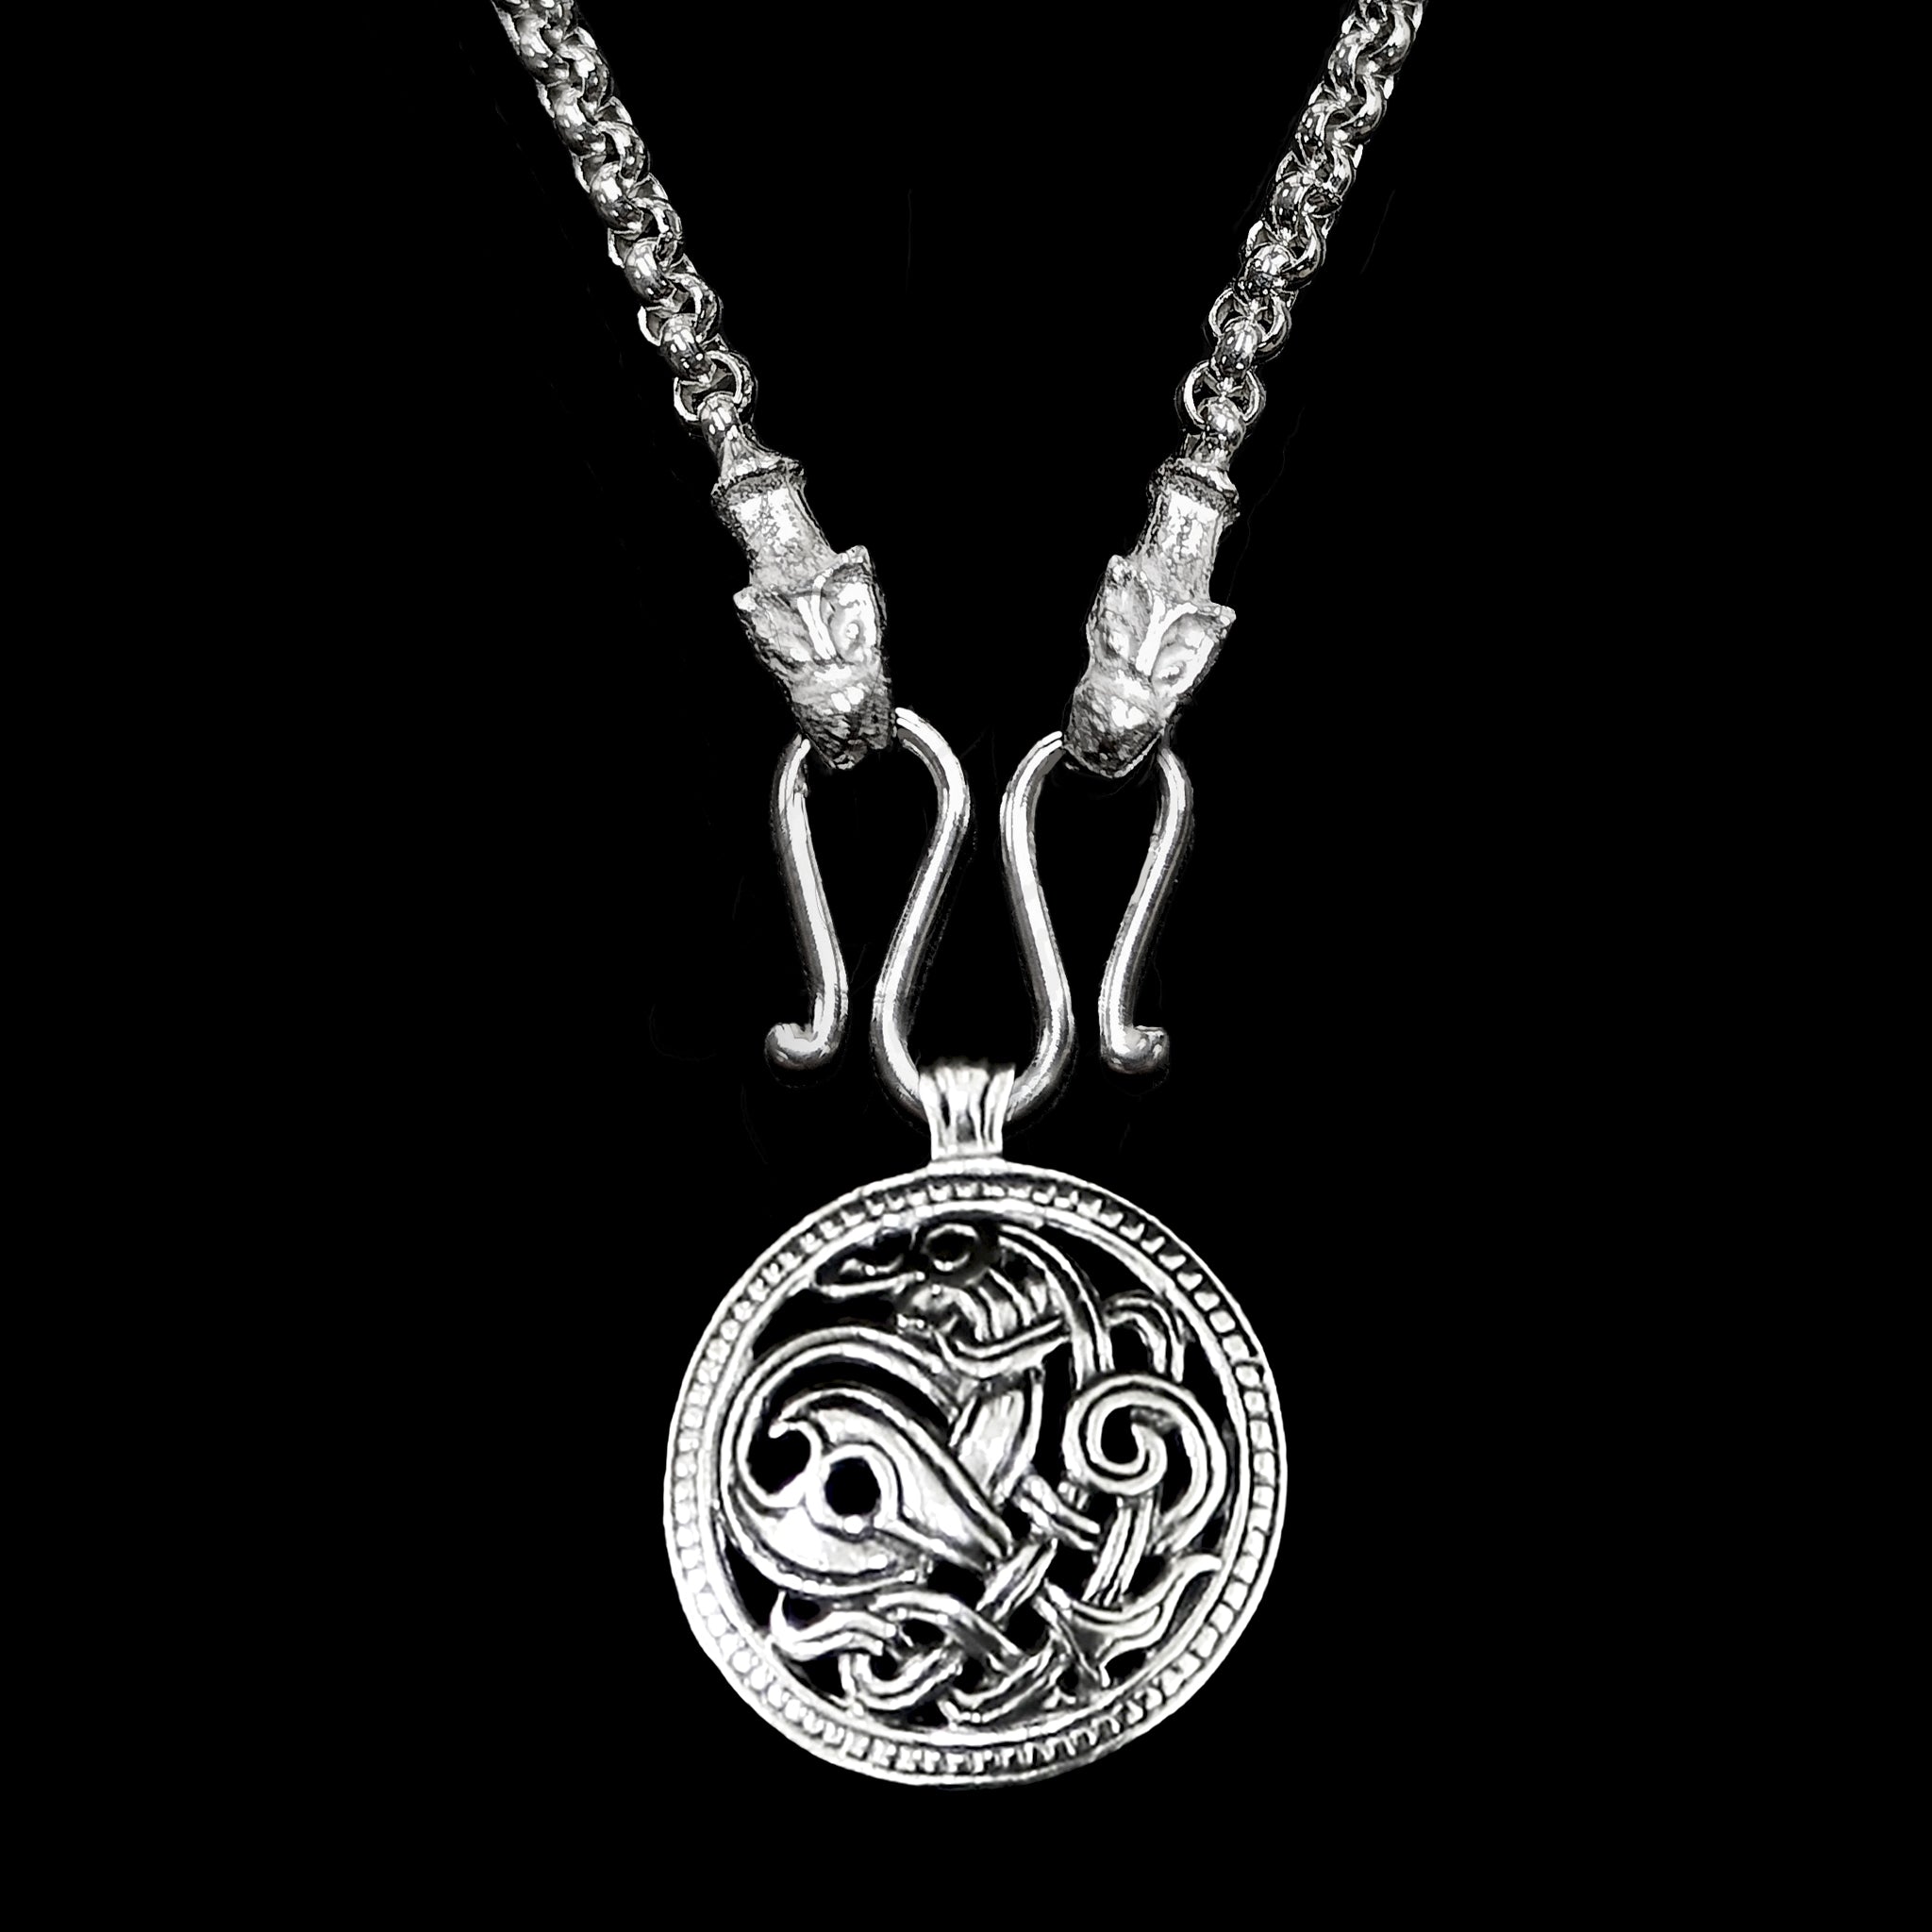 Slim Silver Anchor Chain Pendant Necklace with Icelandic Wolf Heads with Jelling Dragon Viking Pendant